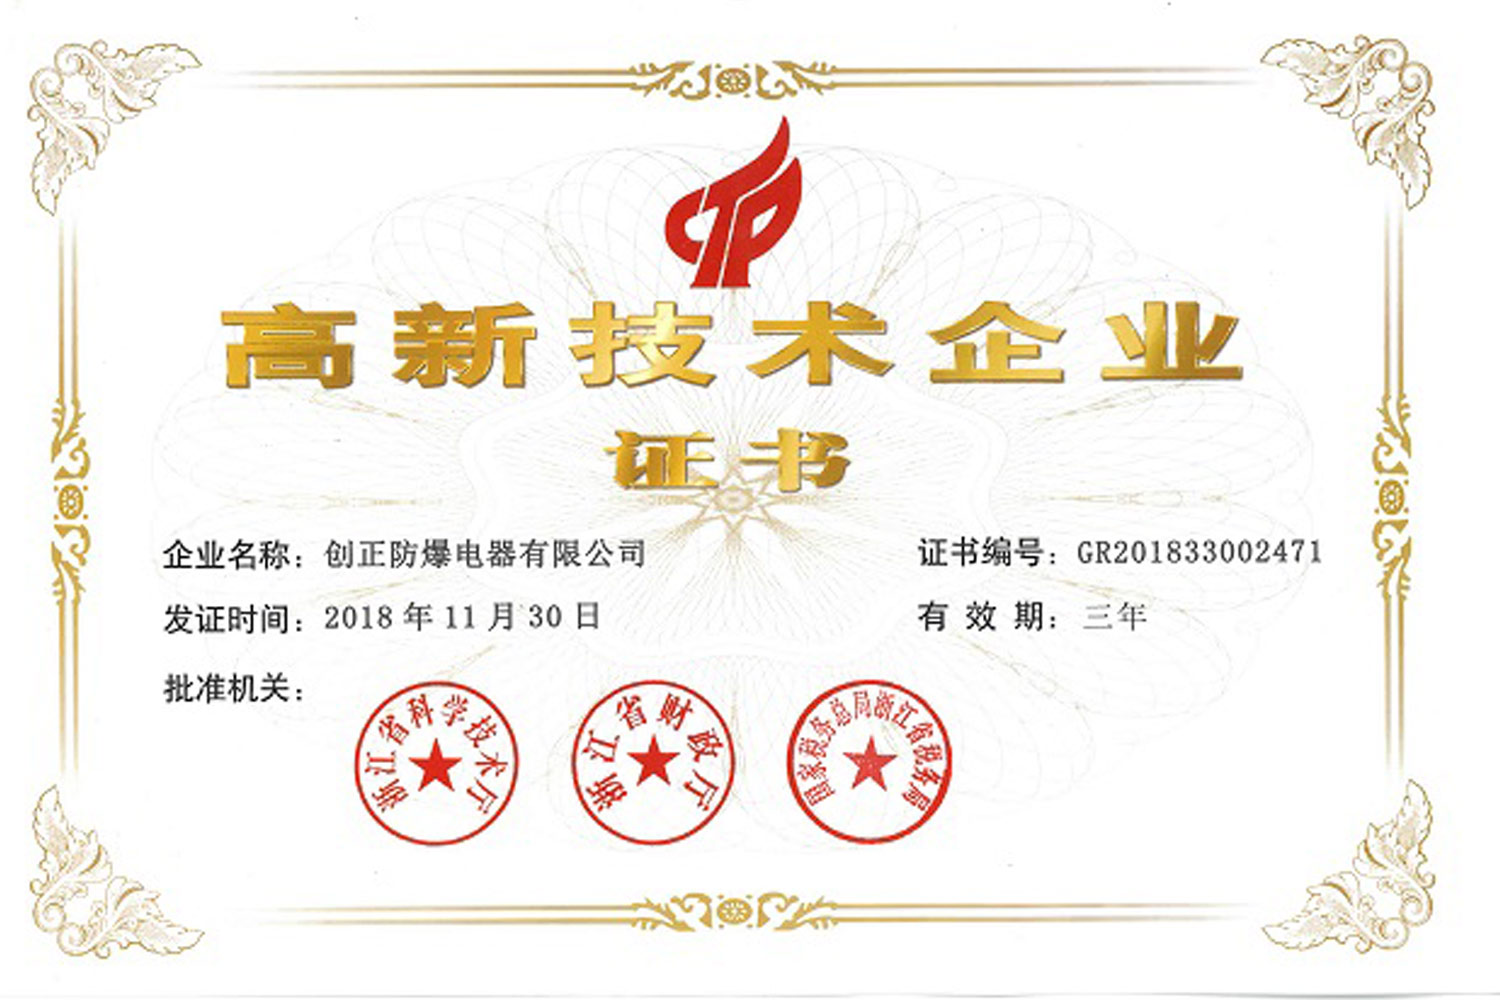 Find CZ for Safety Explosion-CZ Explosion-proof was rated as a national high-tech enterprise again